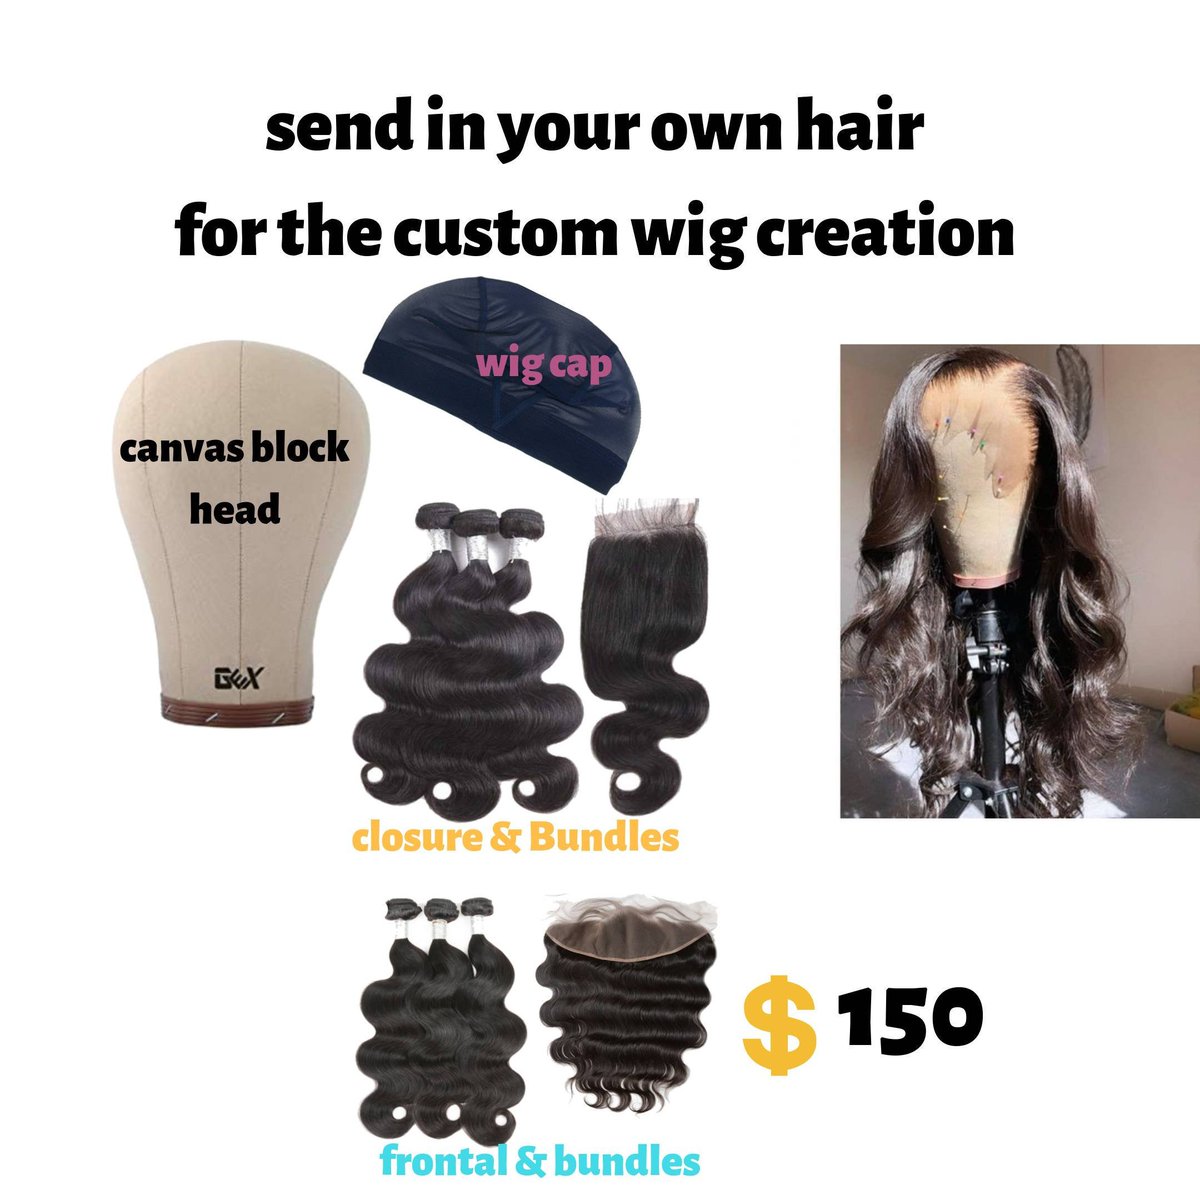 Excited to share the latest addition to my #etsy shop: Custom Handmade wig service etsy.me/2Z2EVbr
#SupportBlackBusiness #smallbizsat #customwigmaker #wigs #WIG #SundayMorning #virginhair #wigservice #frontalwig #closurewig #360wig #upartwig